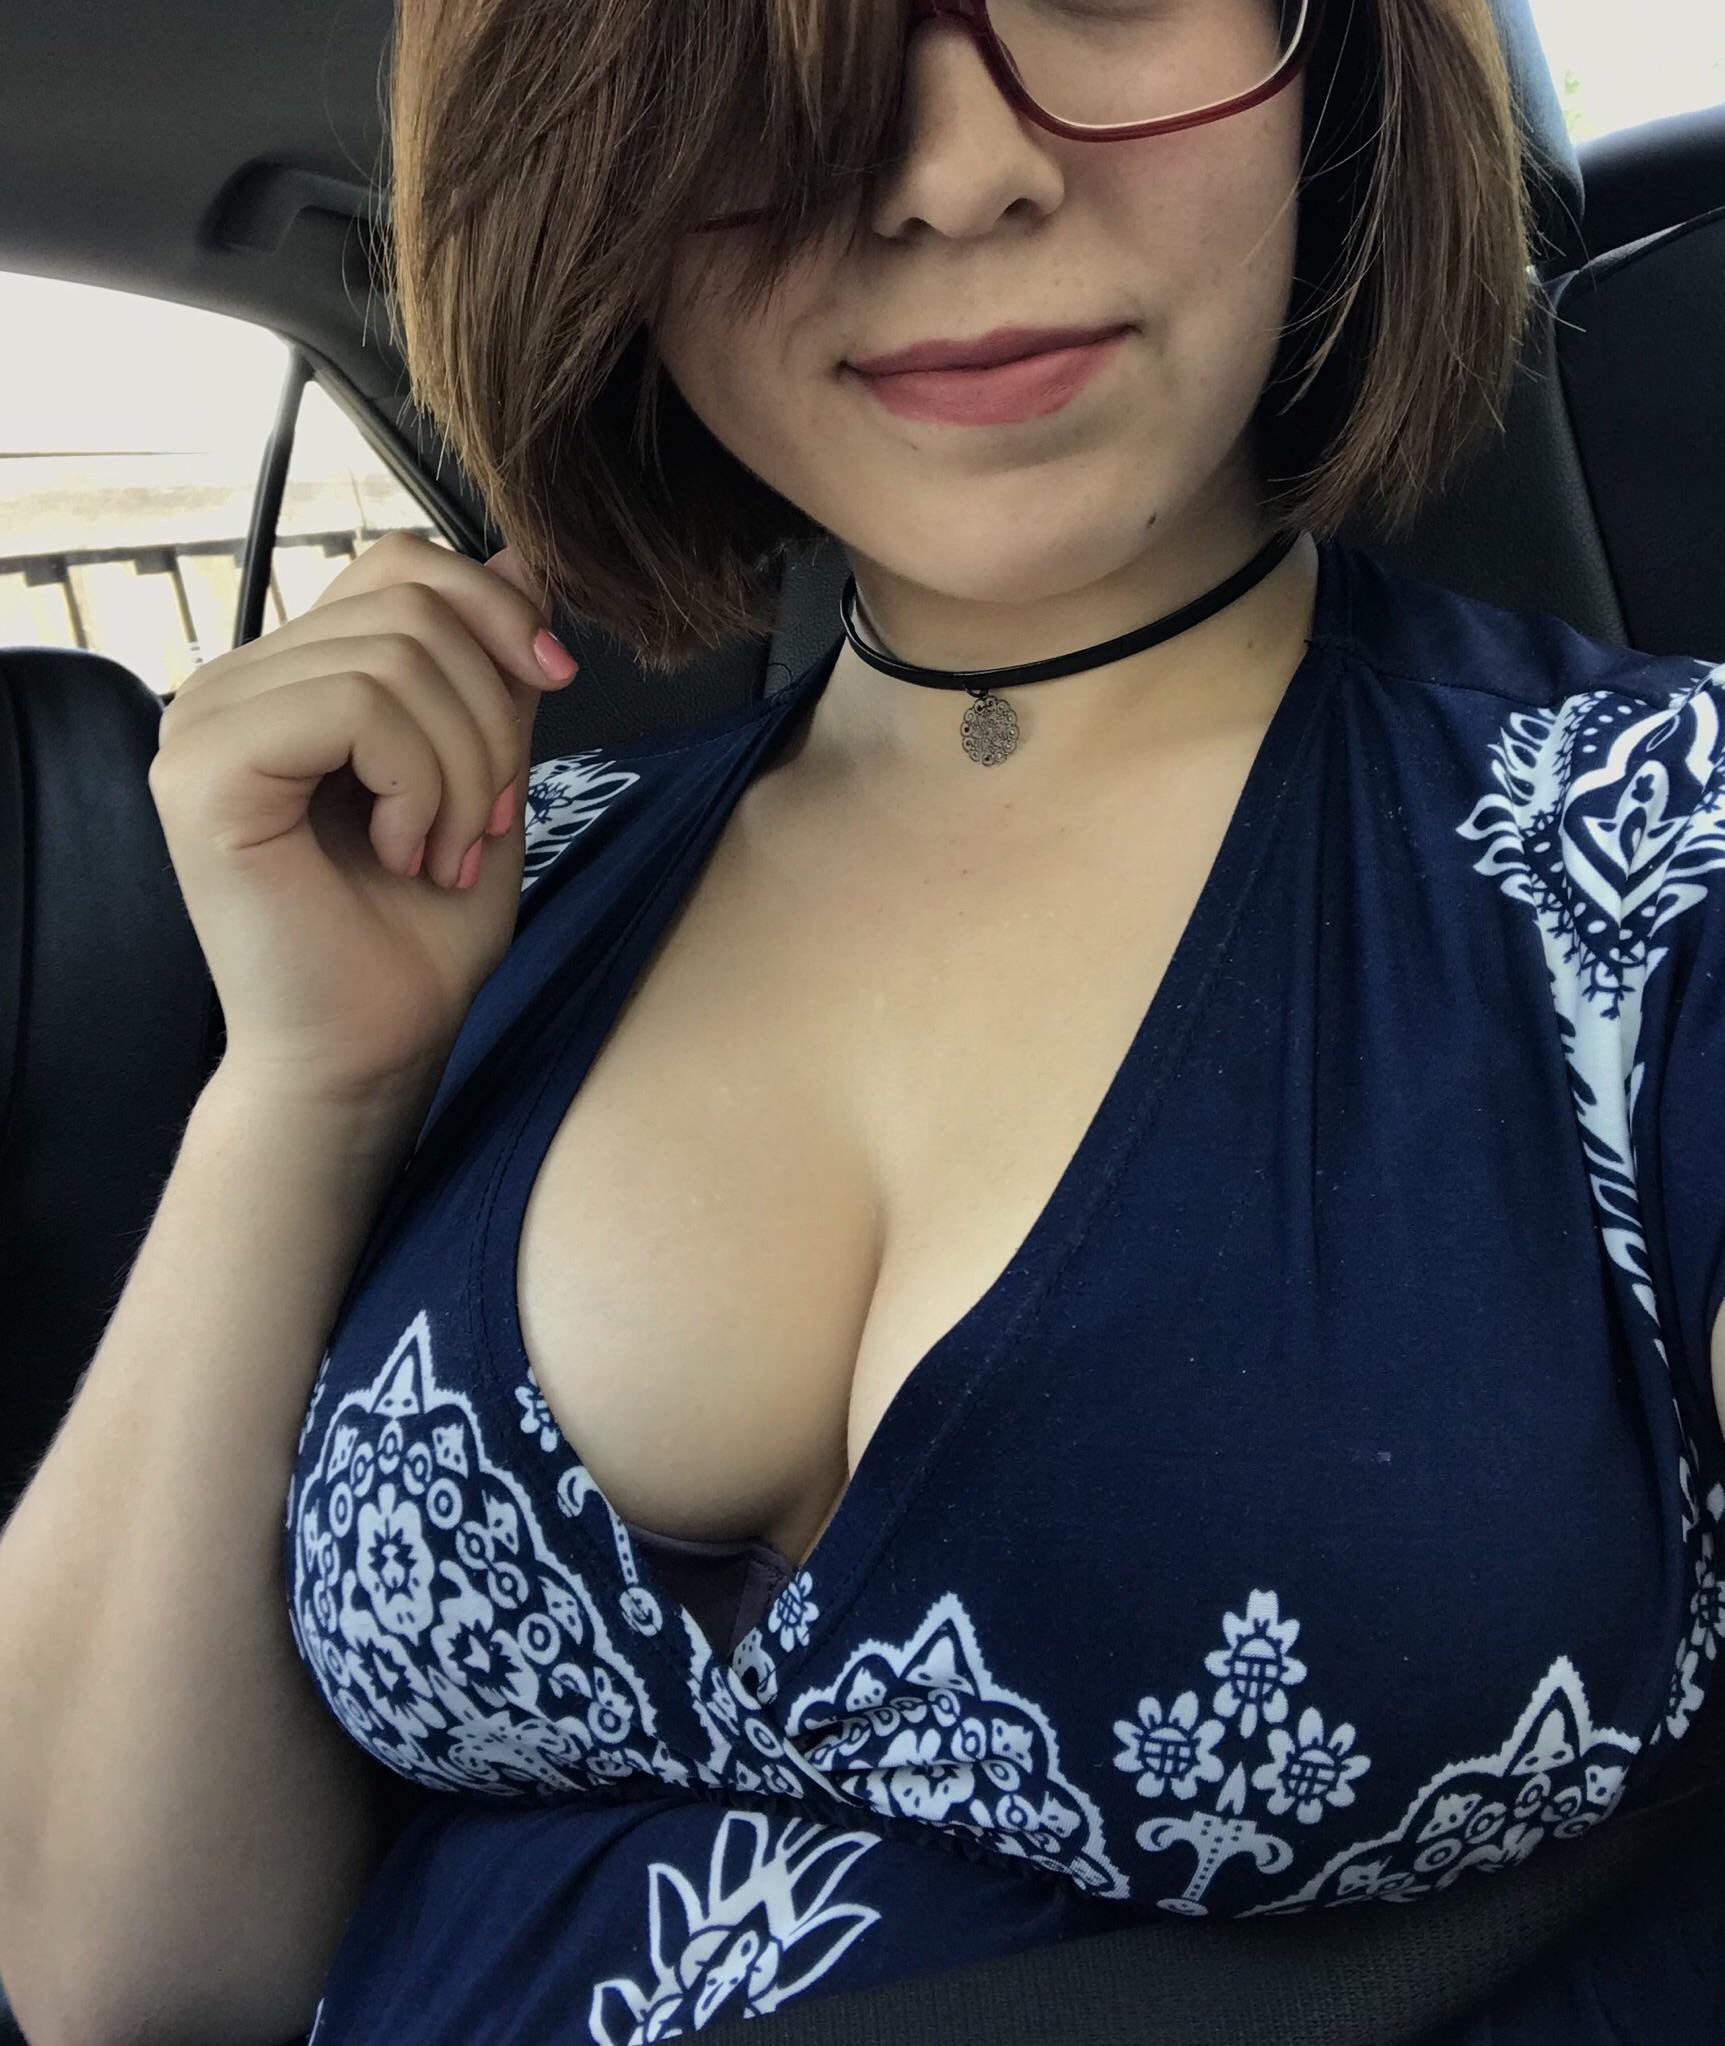 One of my favorite dresses to show off cleavage 